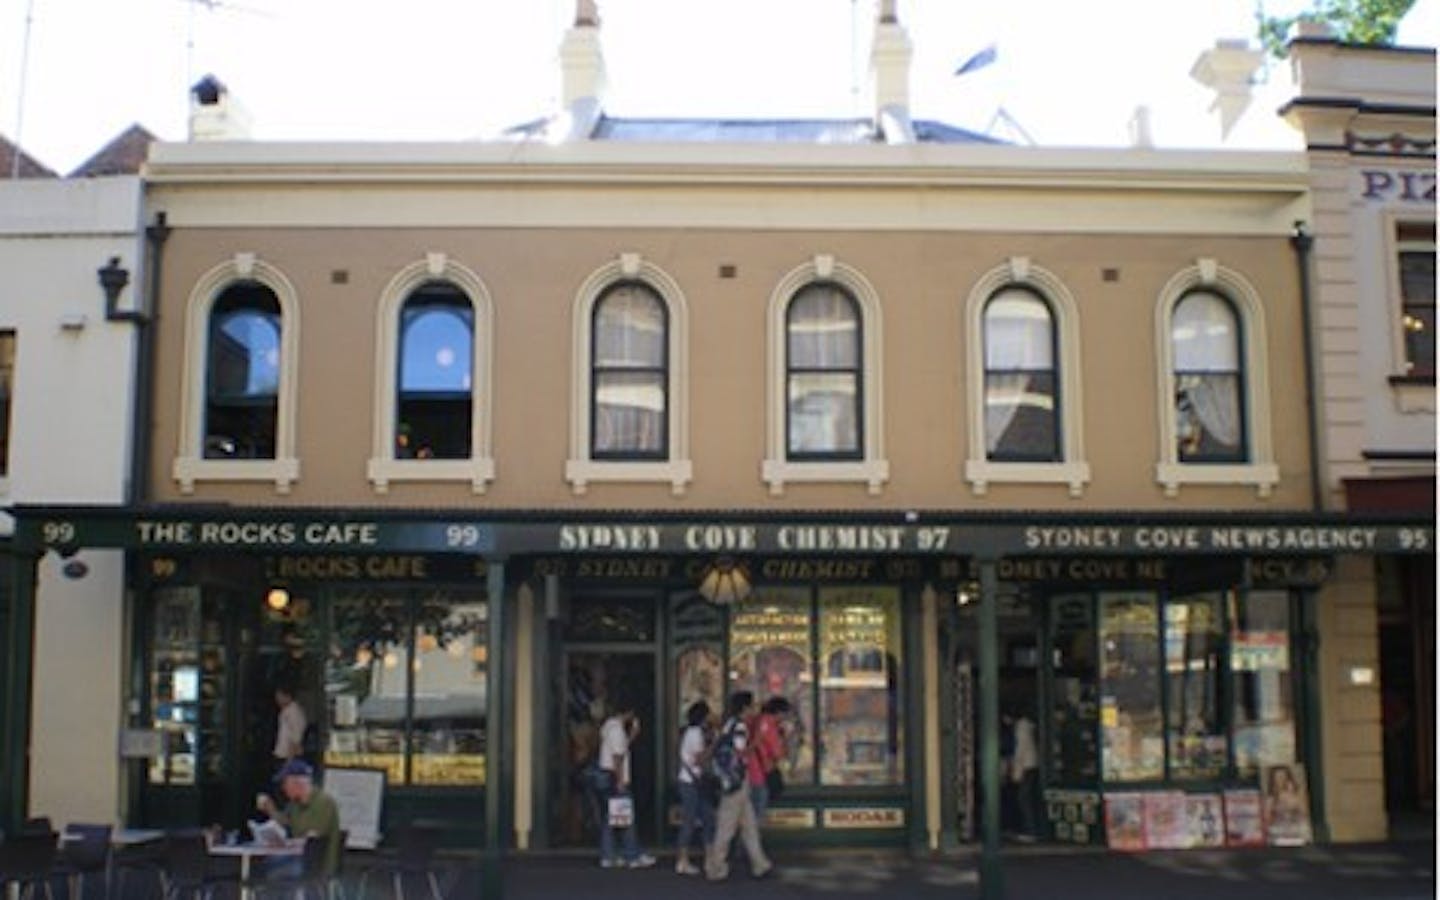 95 99 George St in 2008 SHFA Collection